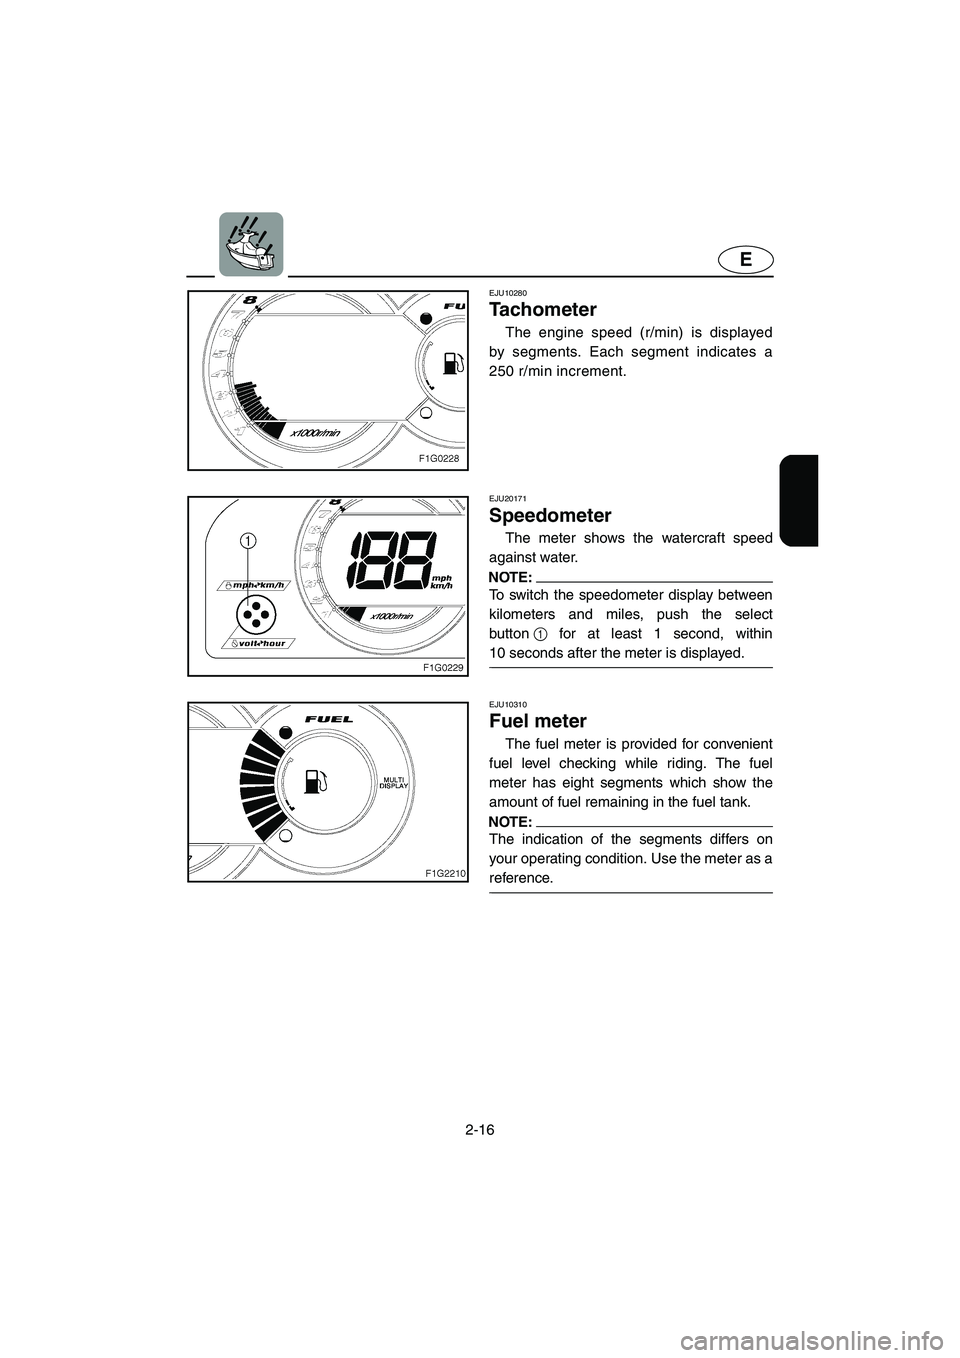 YAMAHA GP1300R 2003  Owners Manual 2-16
E
EJU10280 
Tachometer  
The engine speed (r/min) is displayed
by segments. Each segment indicates a
250 r/min increment. 
EJU20171 
Speedometer 
The meter shows the watercraft speed
against wate